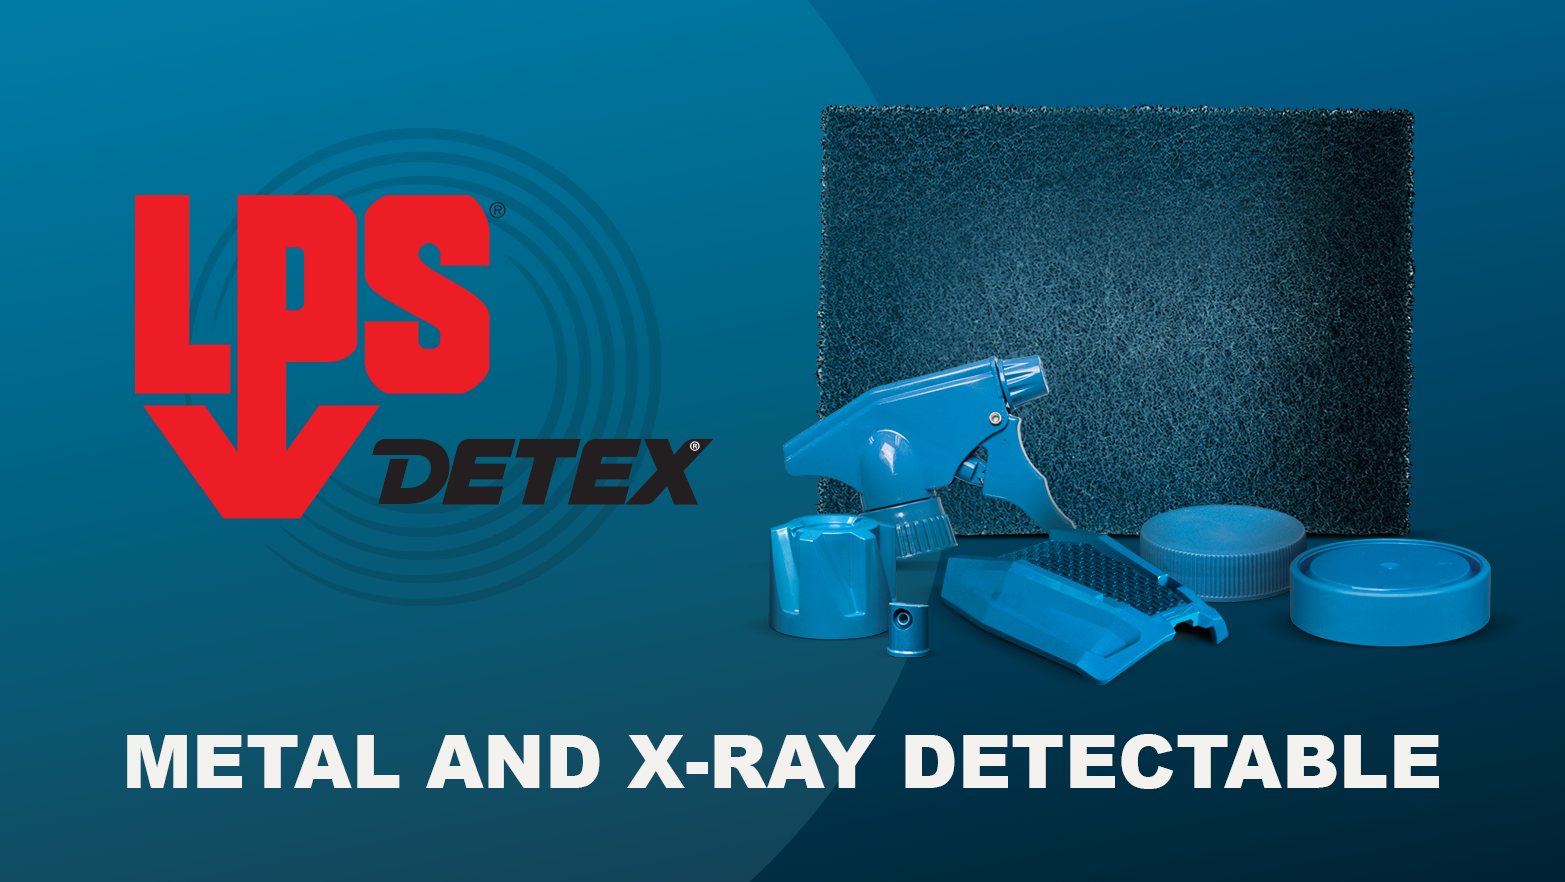 LPS DETEX: Detectable components reduce the risk of foreign object contamination in food processing